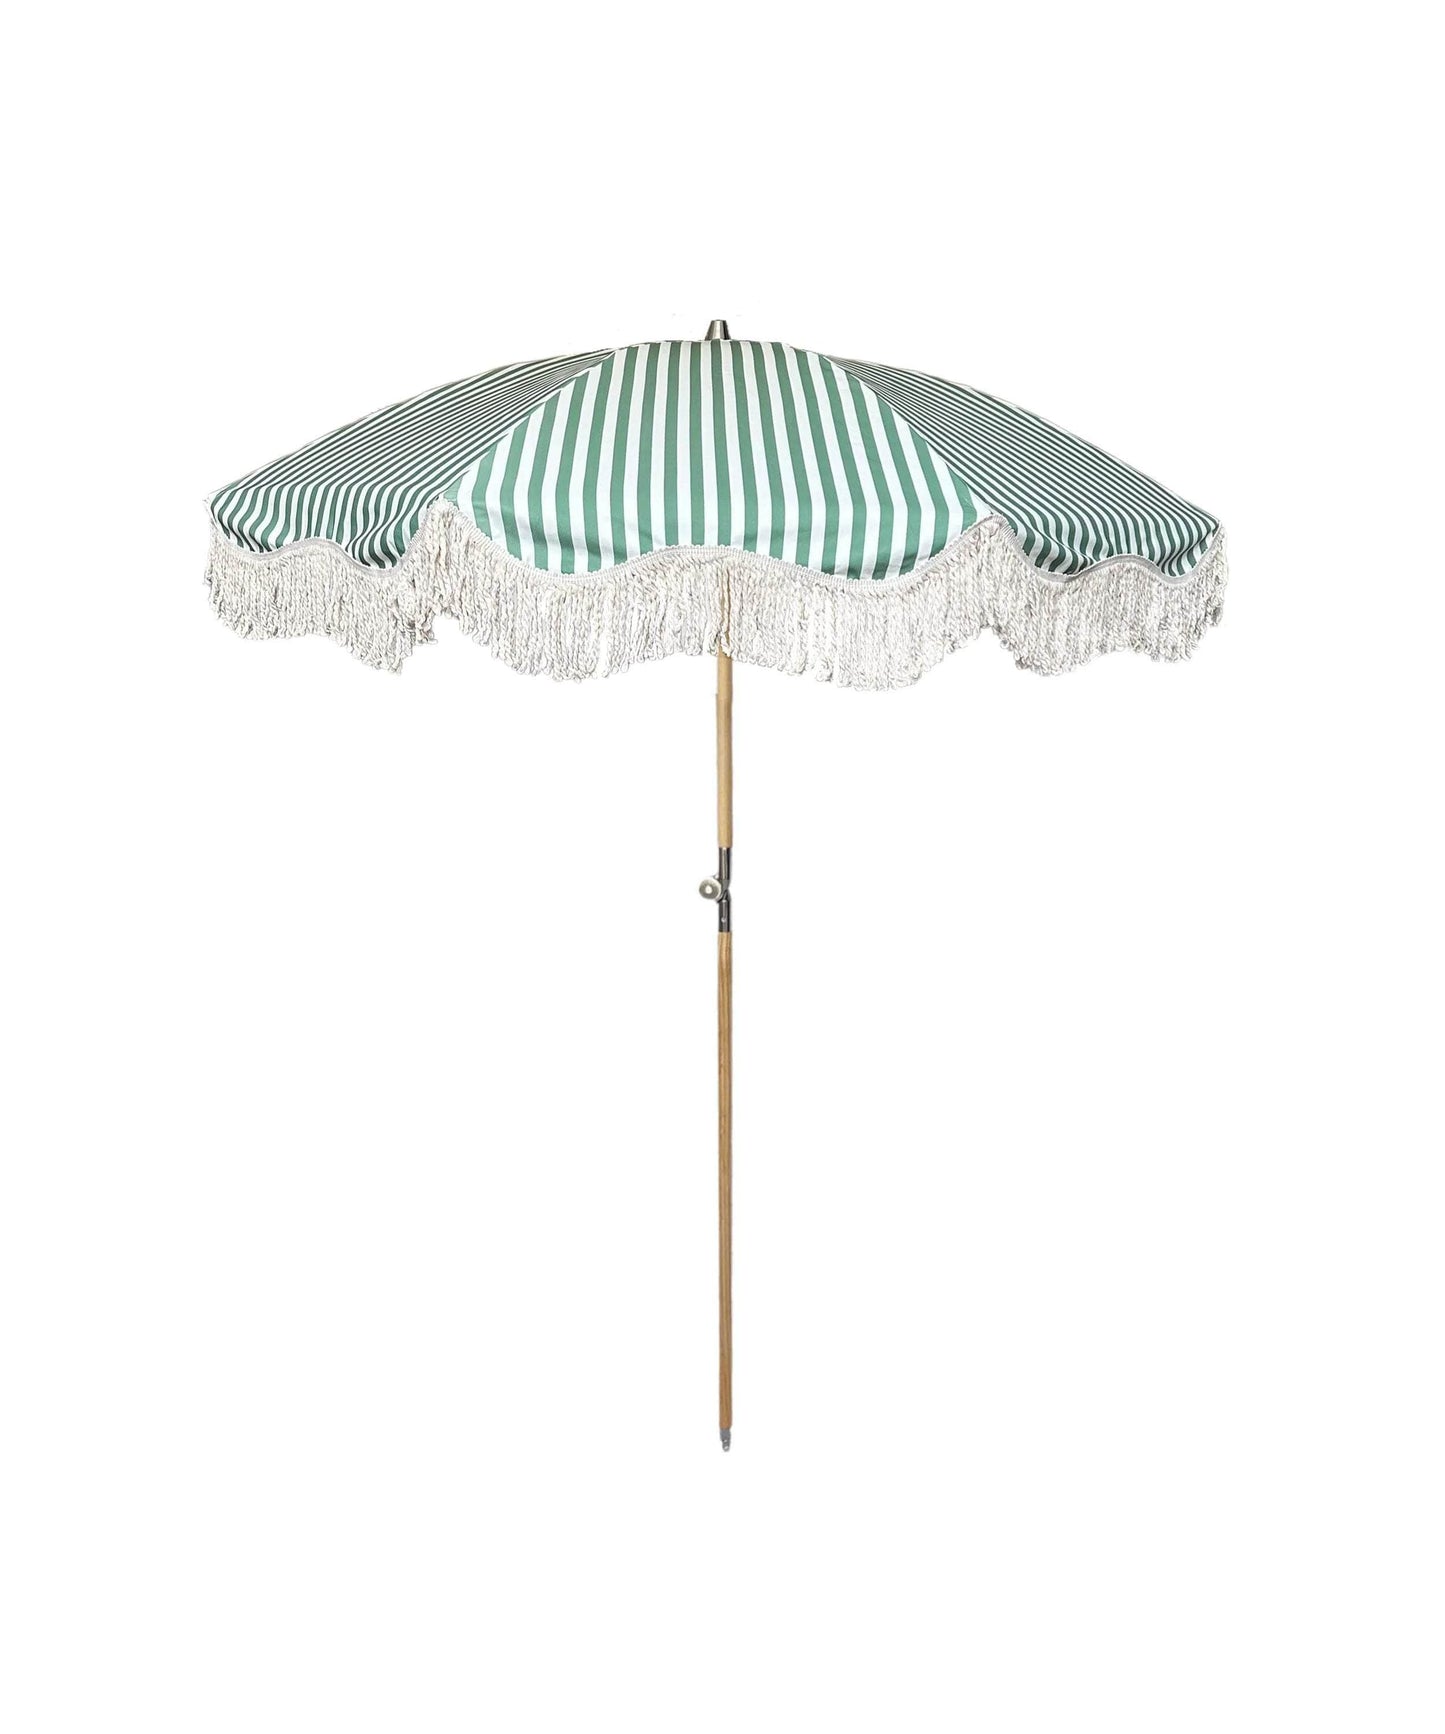 The Theodore Parasol